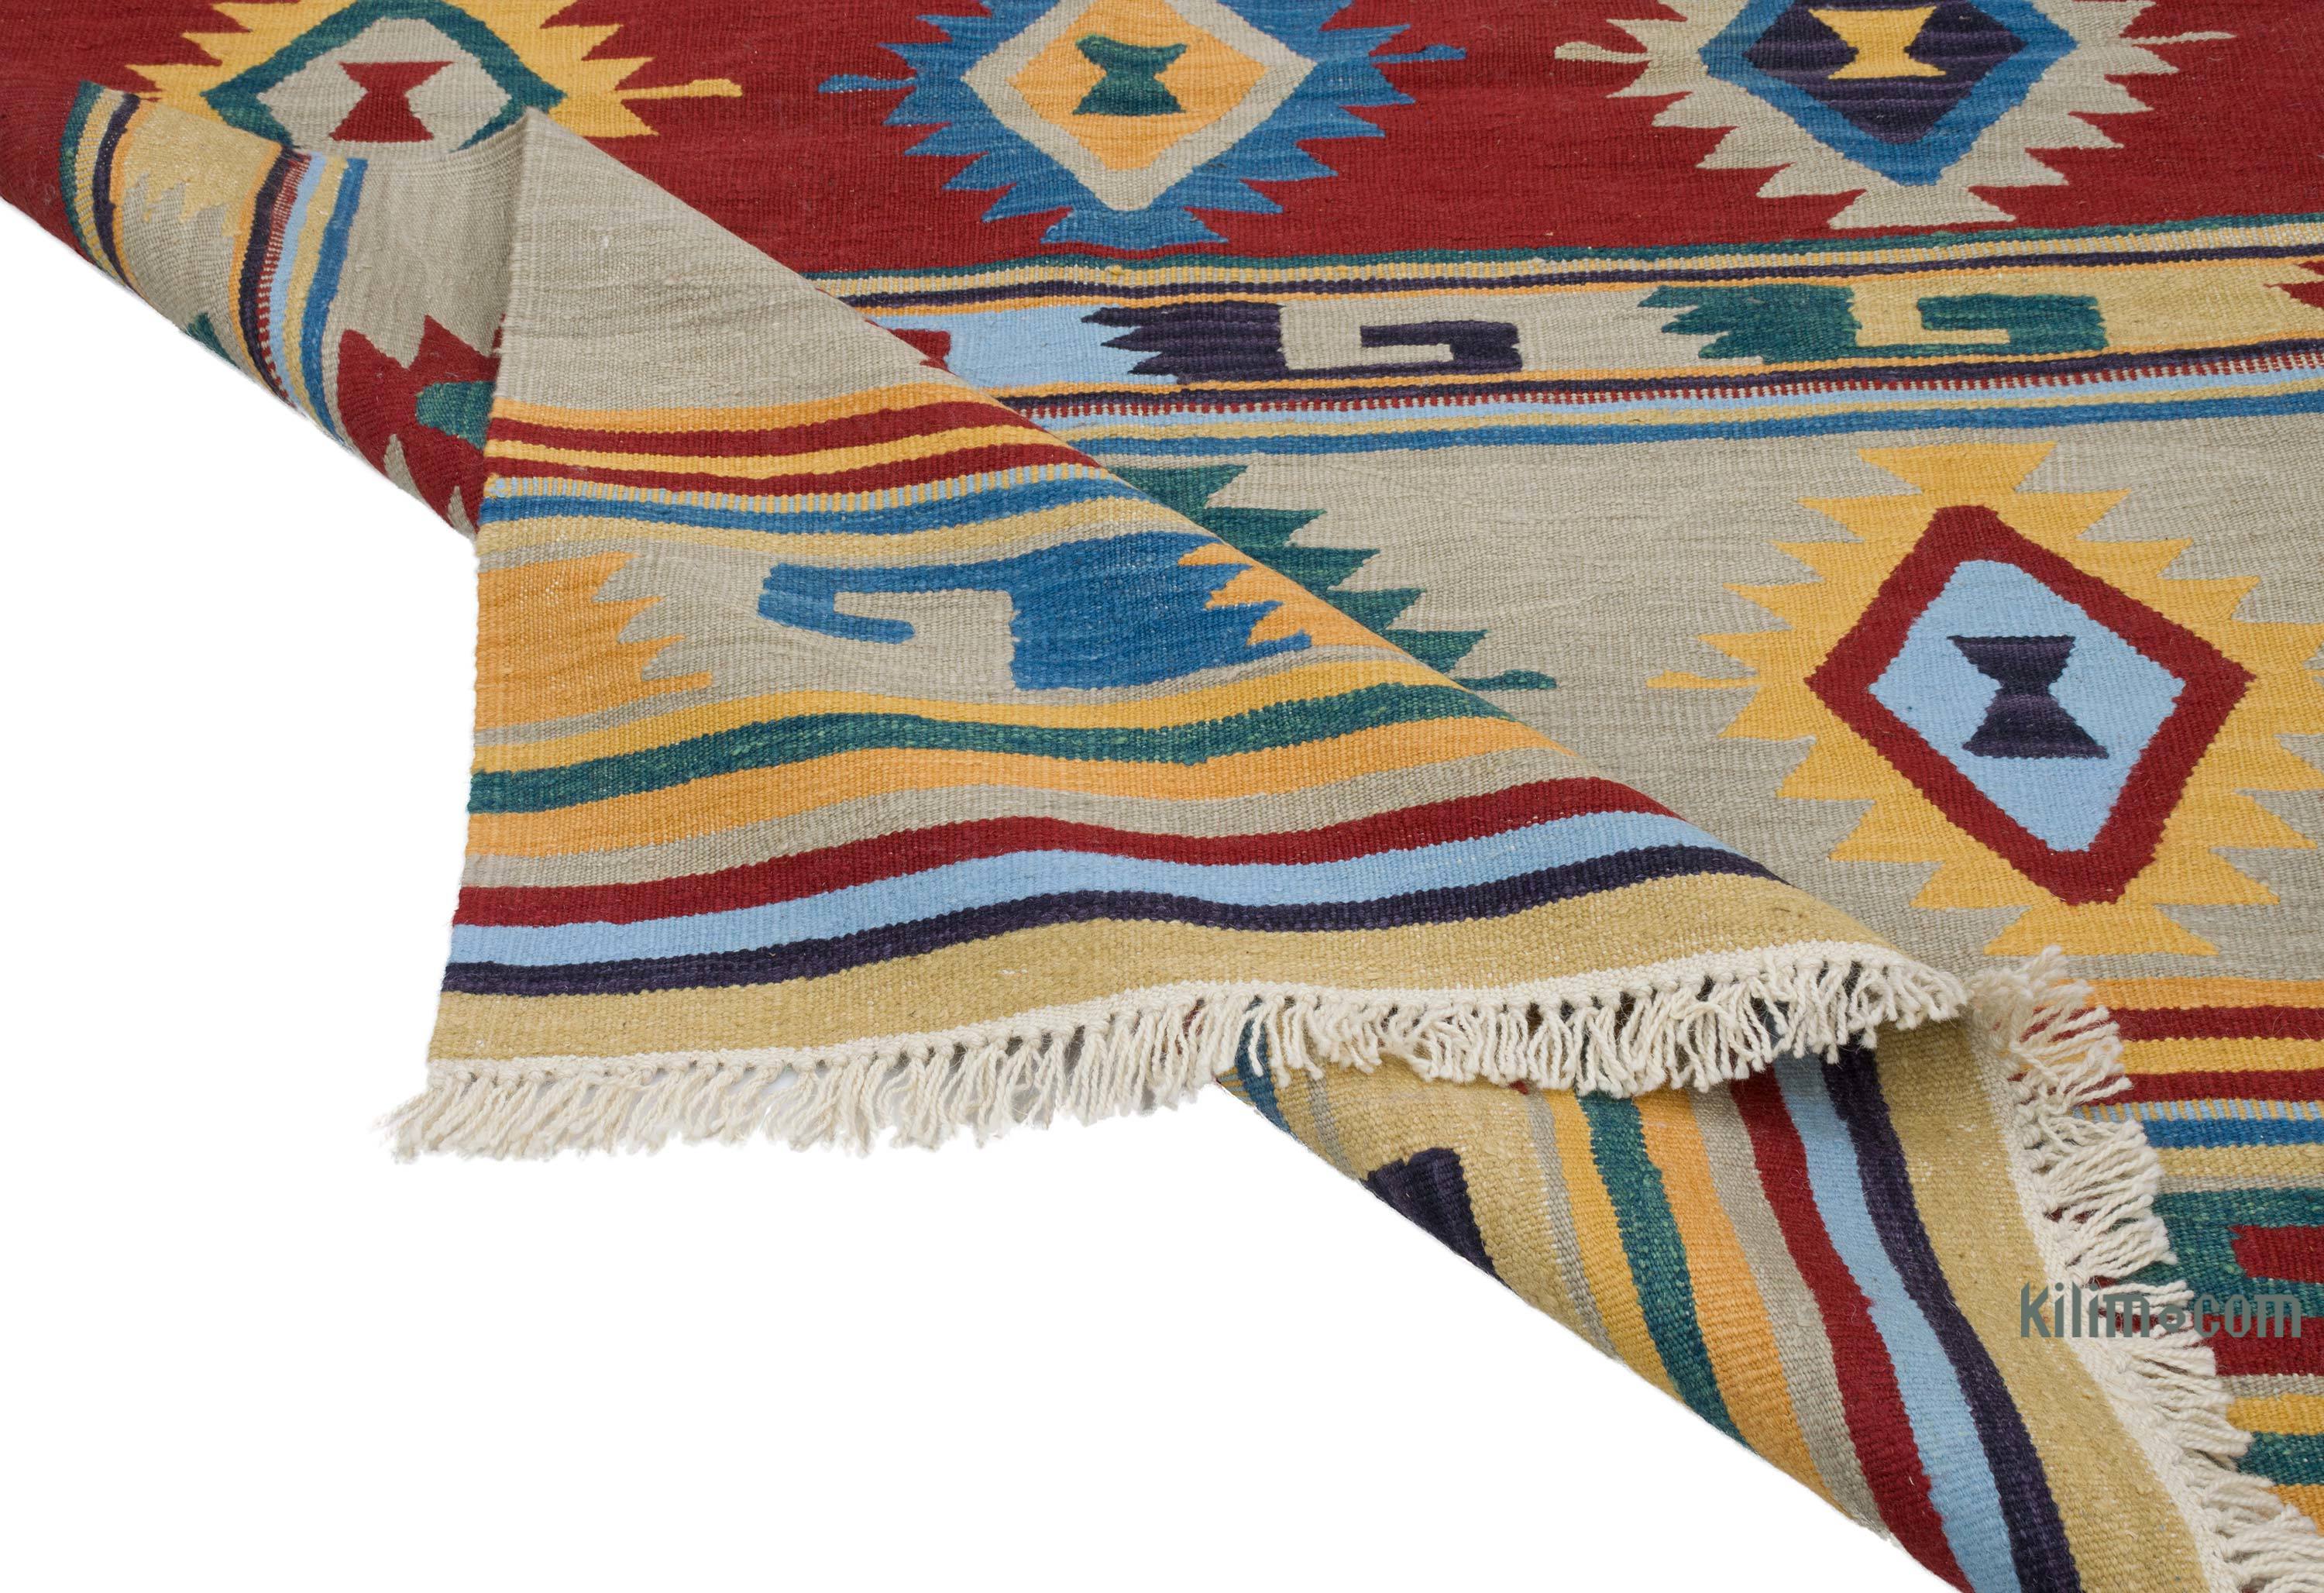 K0059550 New Handwoven Turkish Kilim Rug - 4' x 6' 3 (48 x 75)  The  Source for Vintage Rugs, Tribal Kilim Rugs, Wool Turkish Rugs, Overdyed  Persian Rugs, Runner Rugs, Patchwork